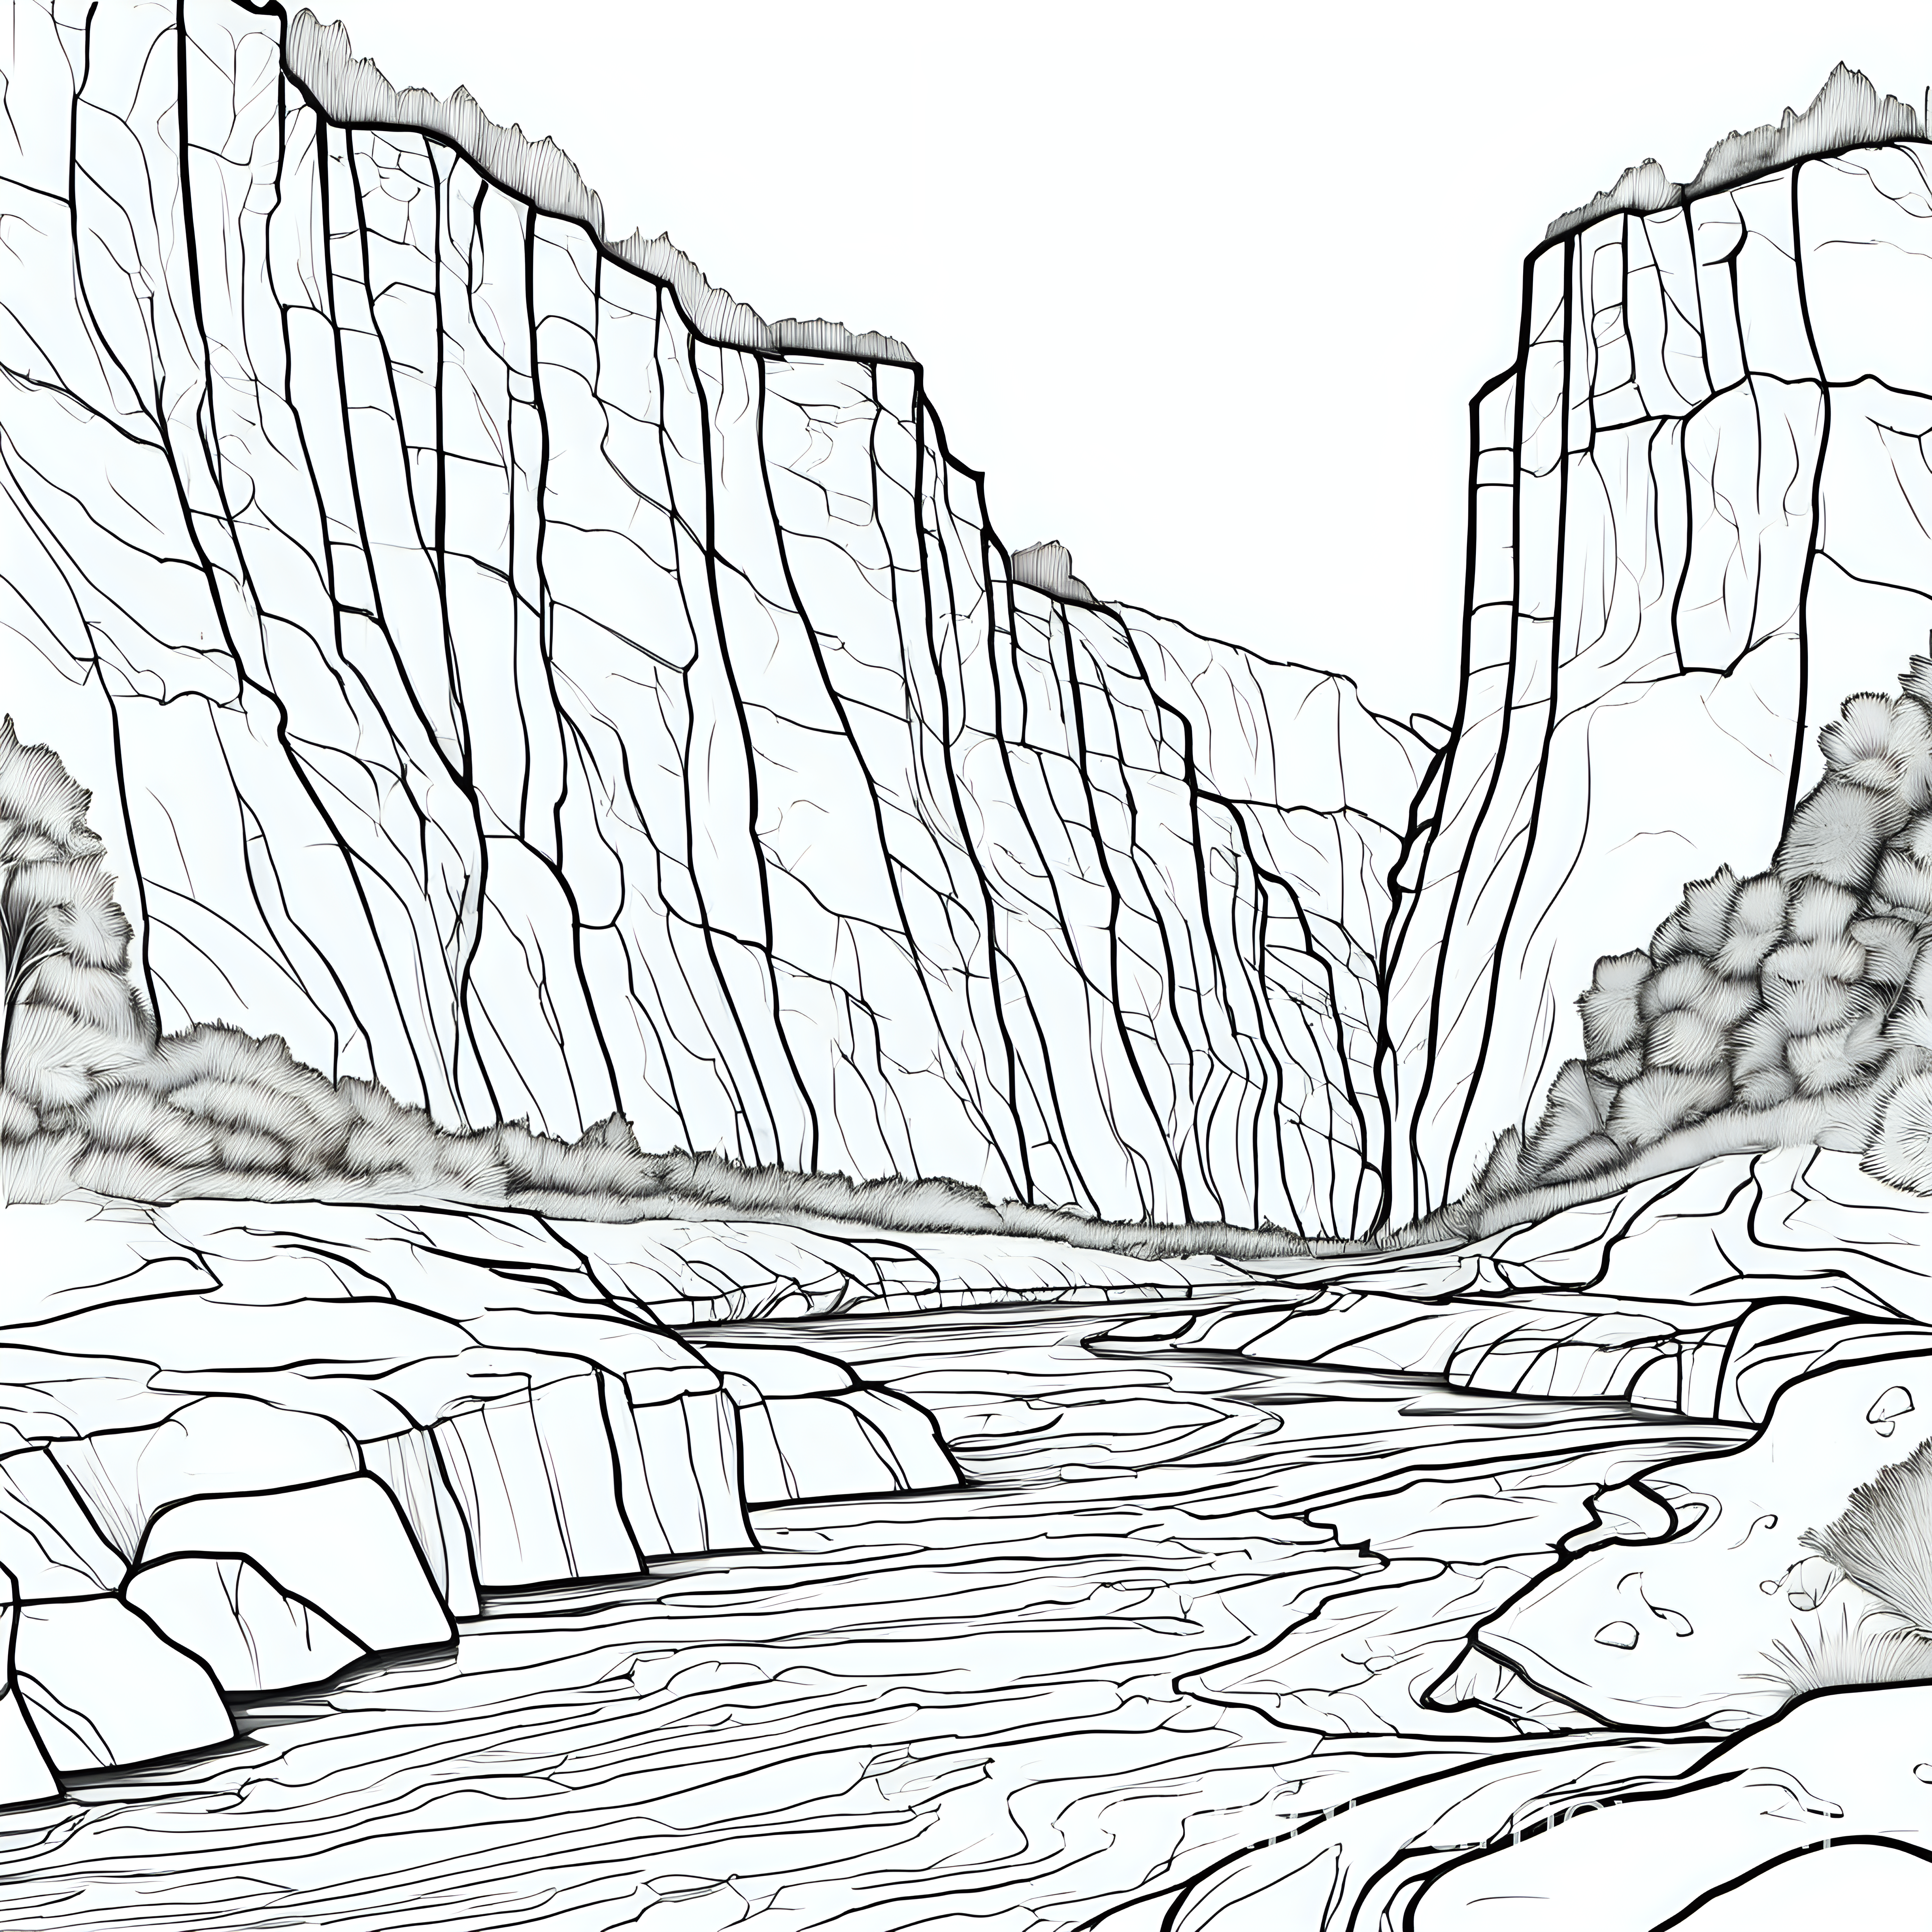 a coloring page that shows erosion along a